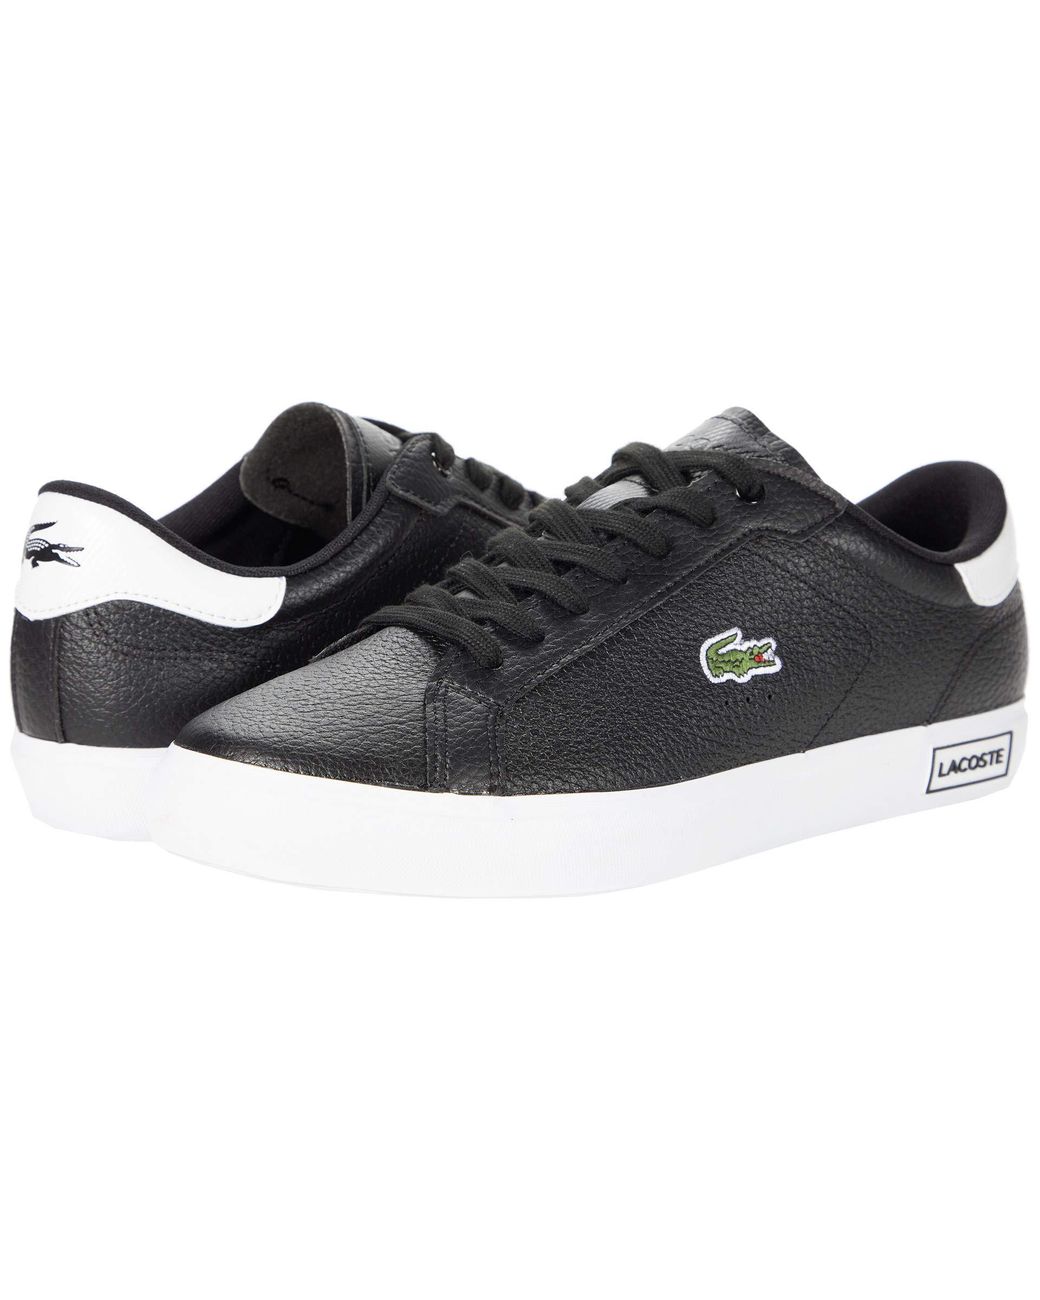 Lacoste Leather Powercourt 0721 2 in Black for Men - Lyst